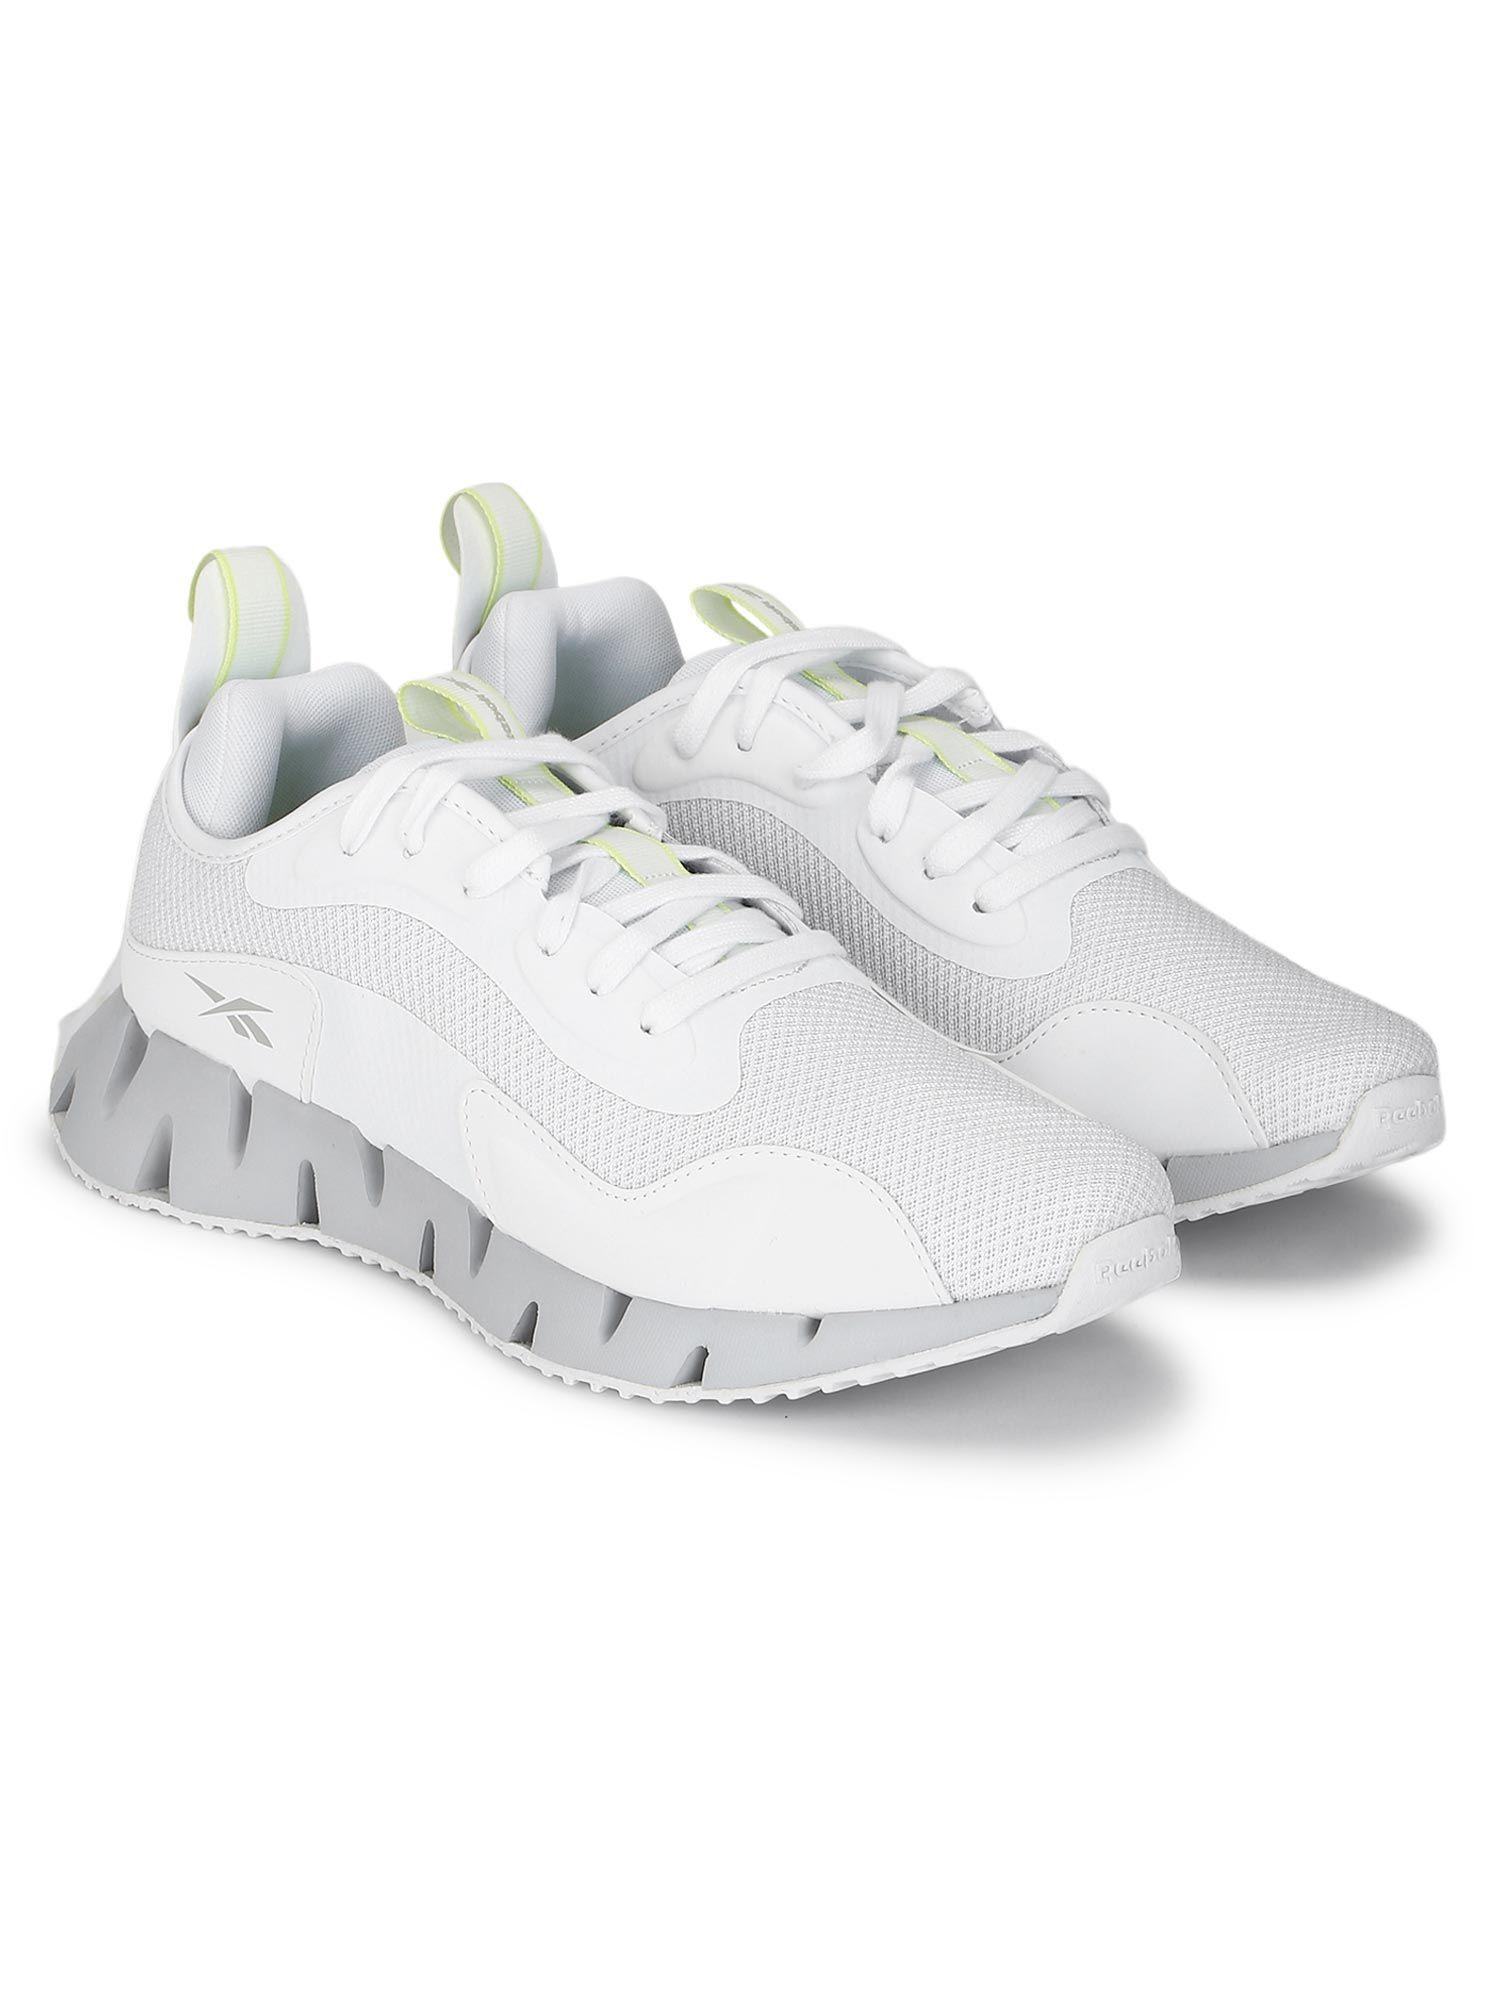 zig dynamica white running shoes